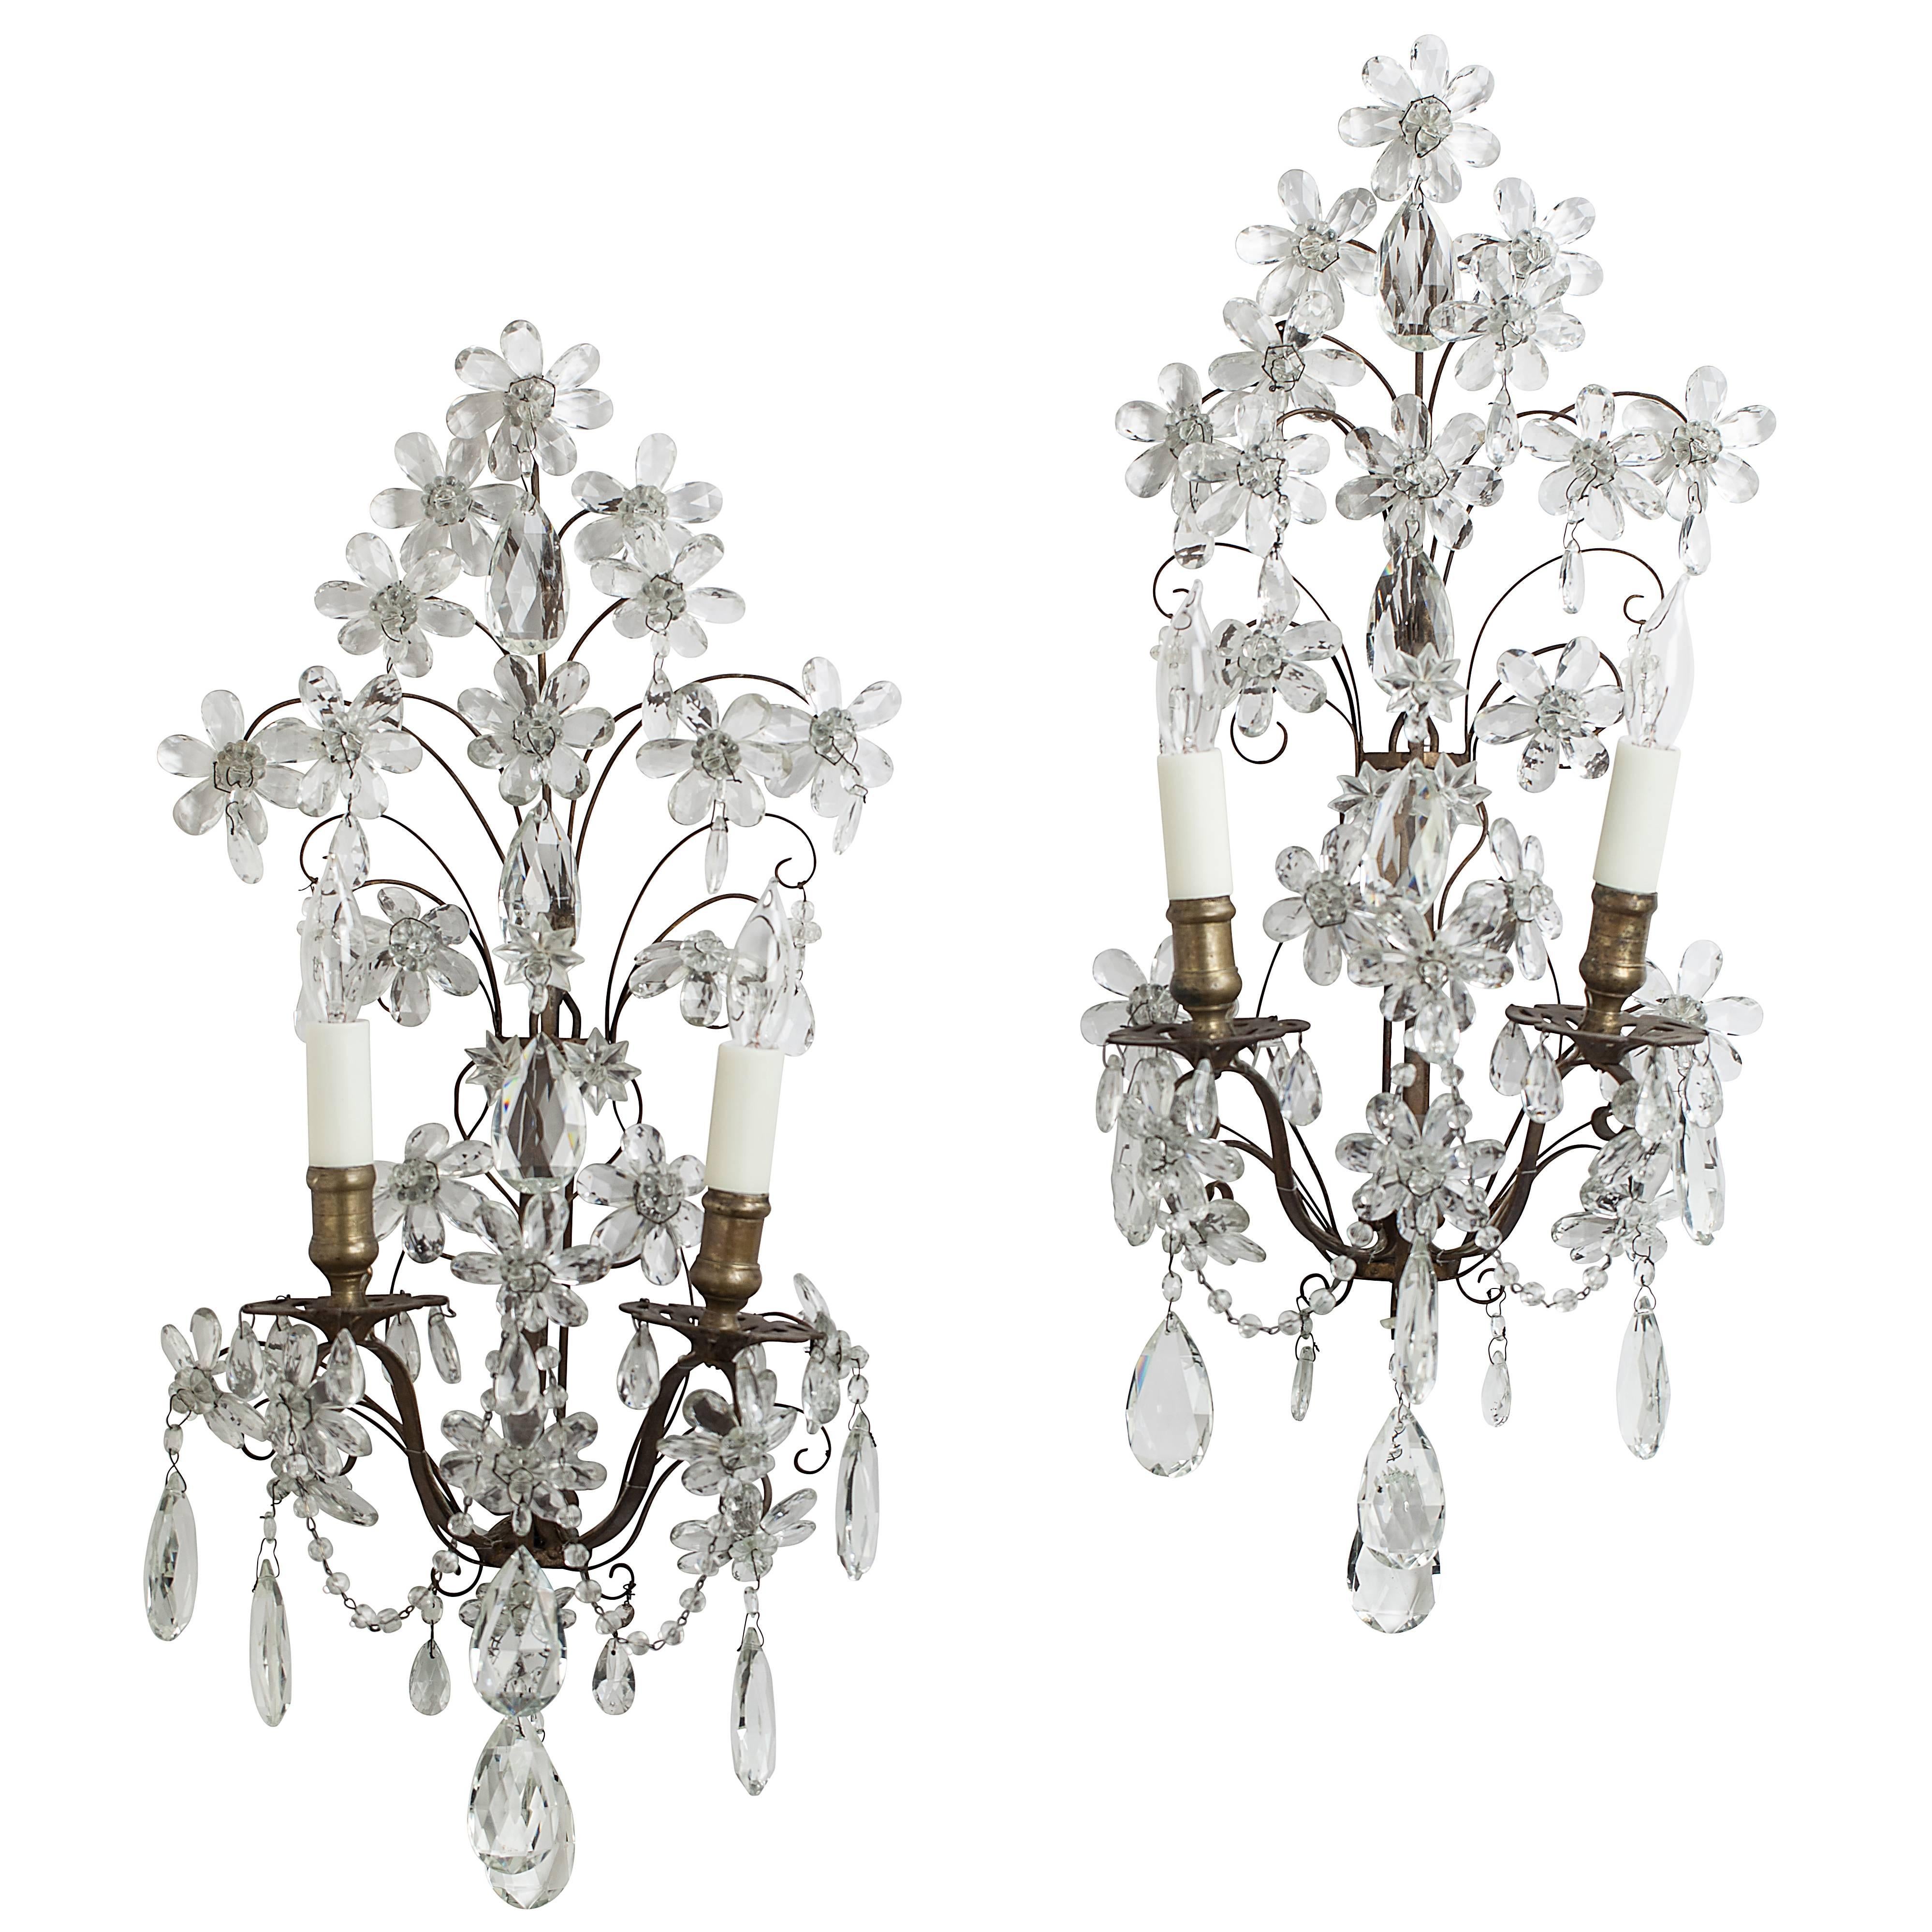 Pair of French Crystal and Brass Sconces, circa 1890